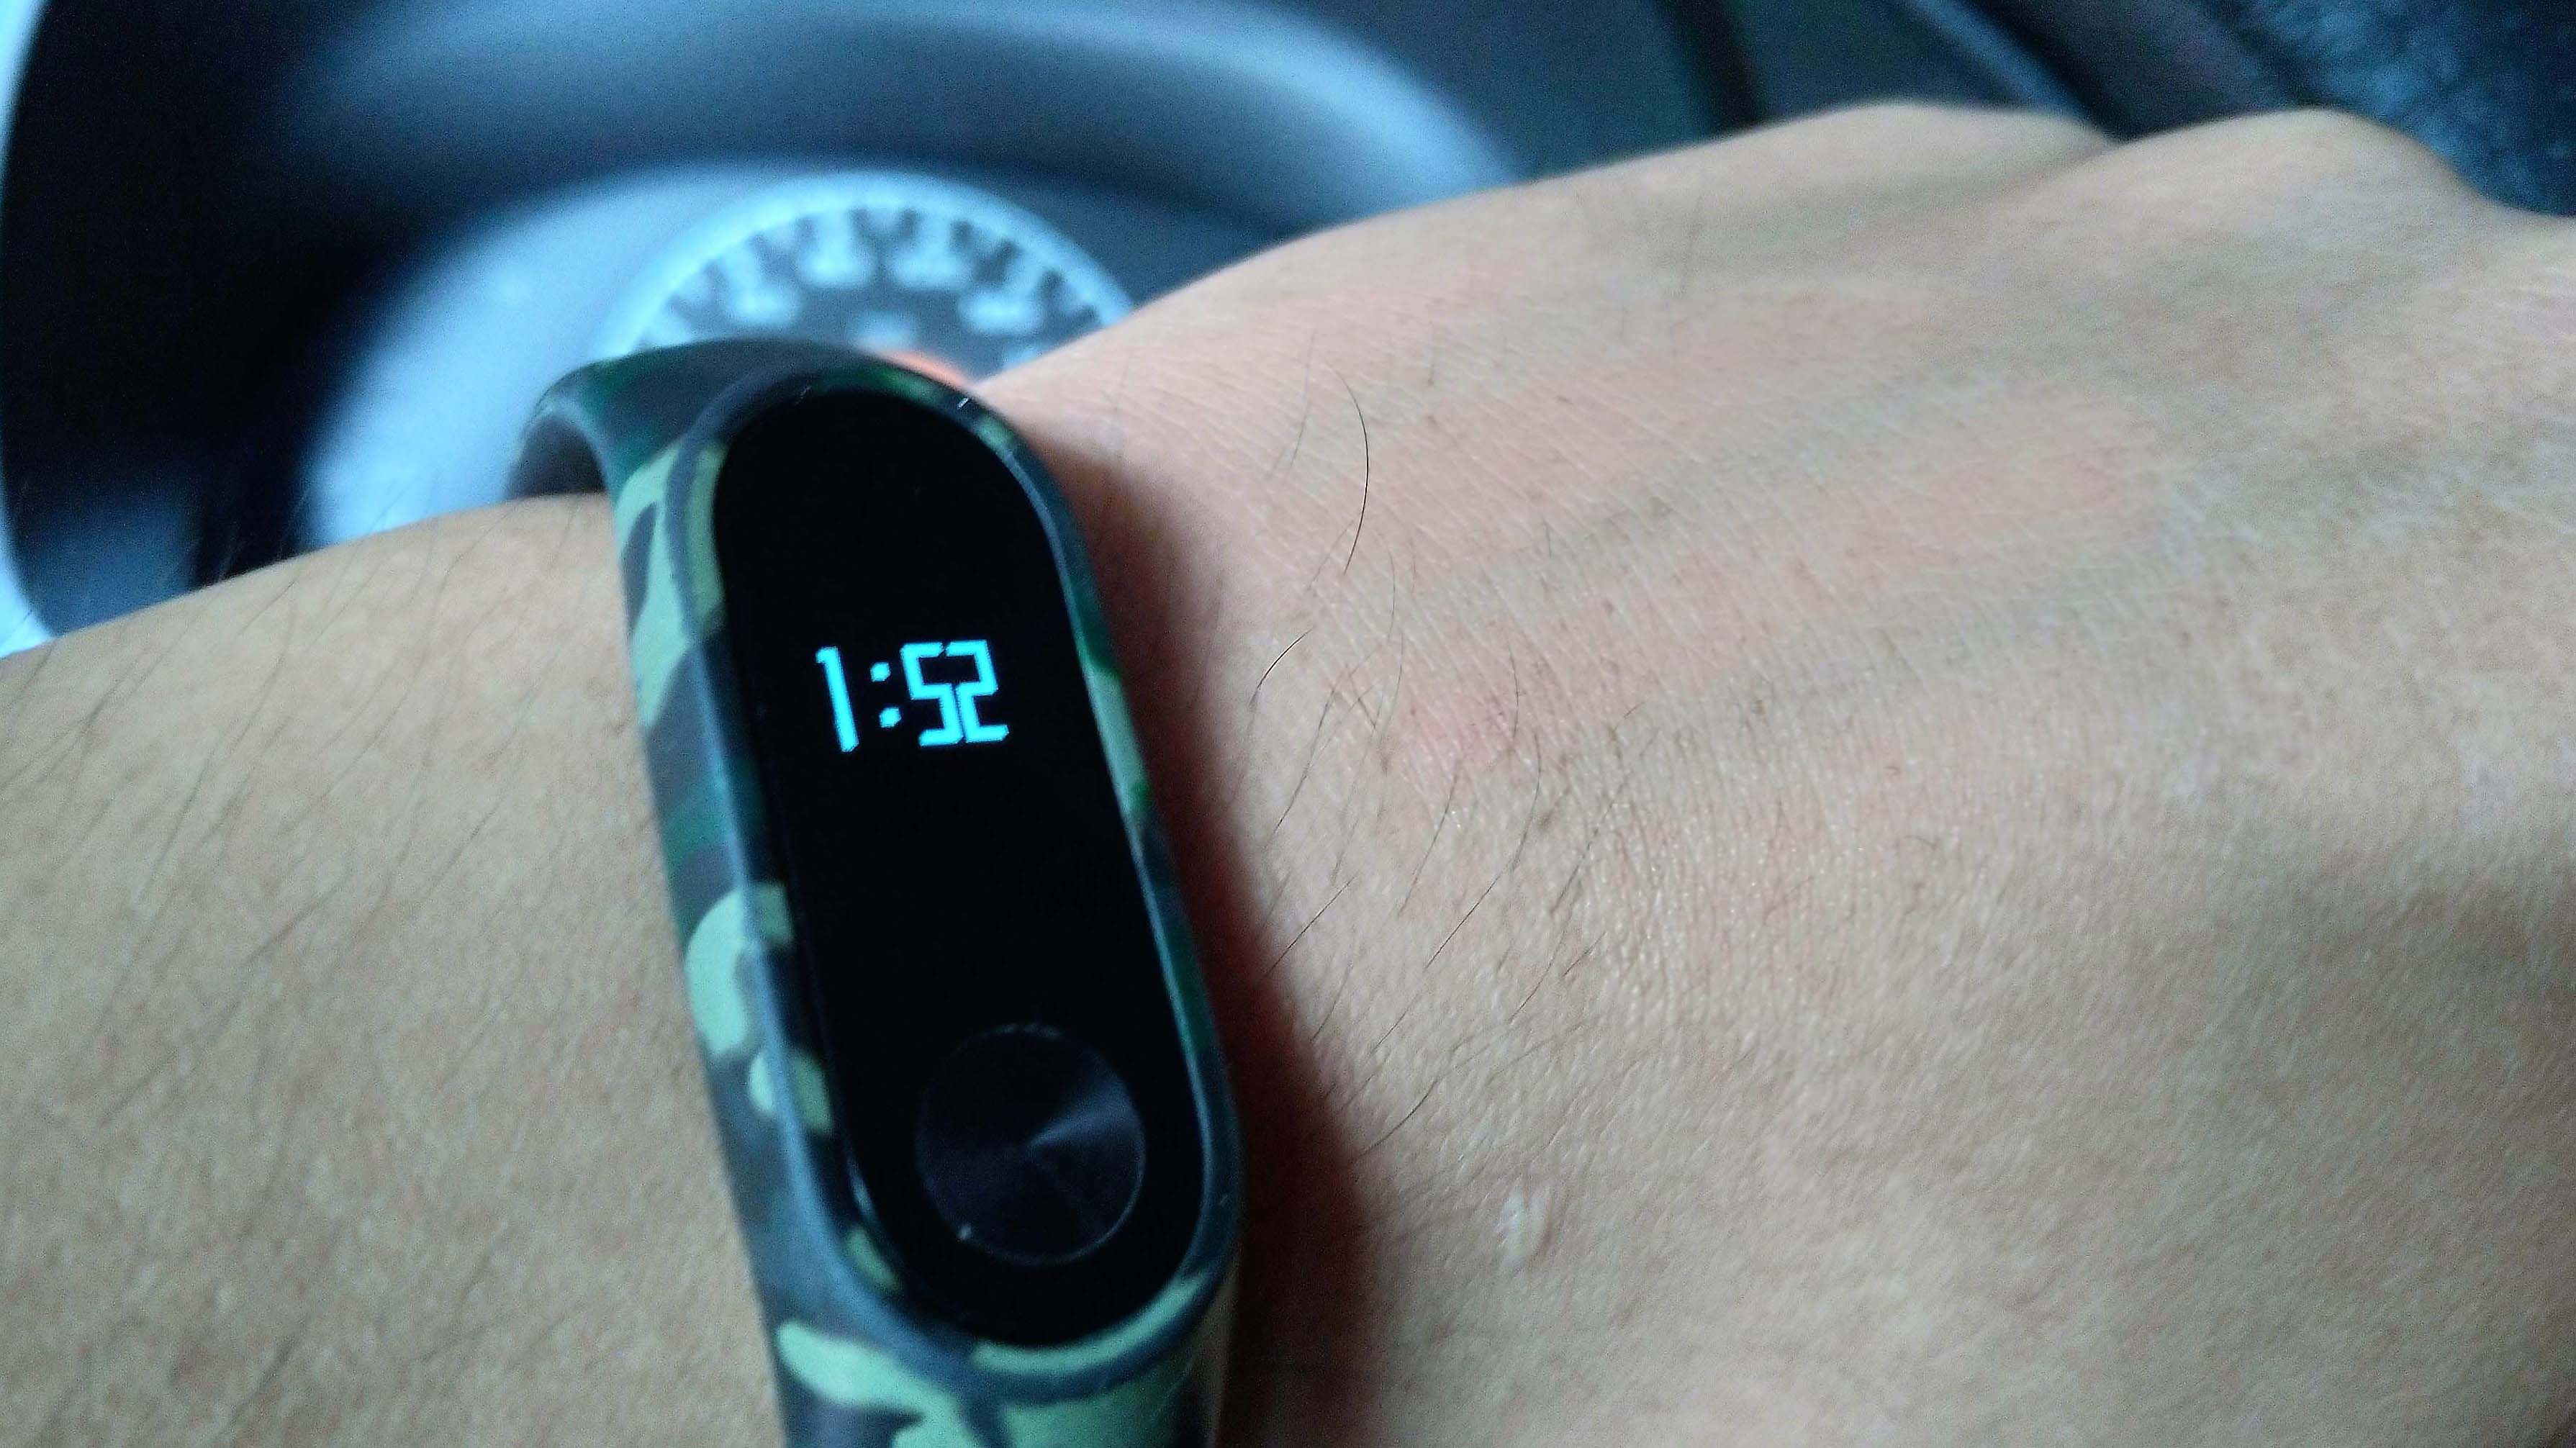 Product Review: Xiaomi Mi Band 2